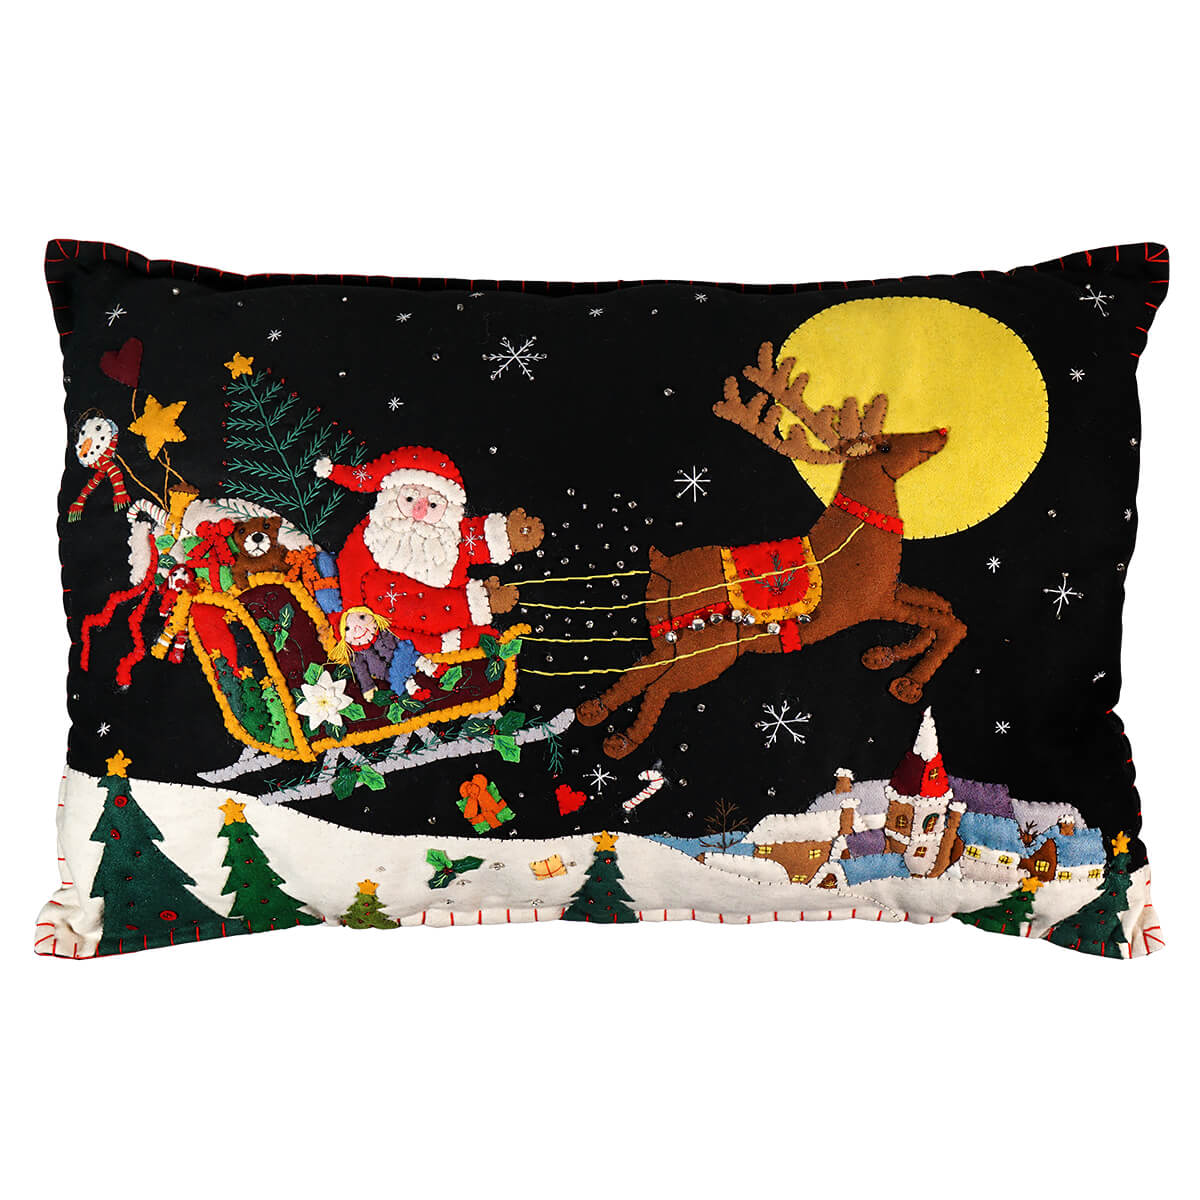 Santa Flying Over Rooftops Pillow